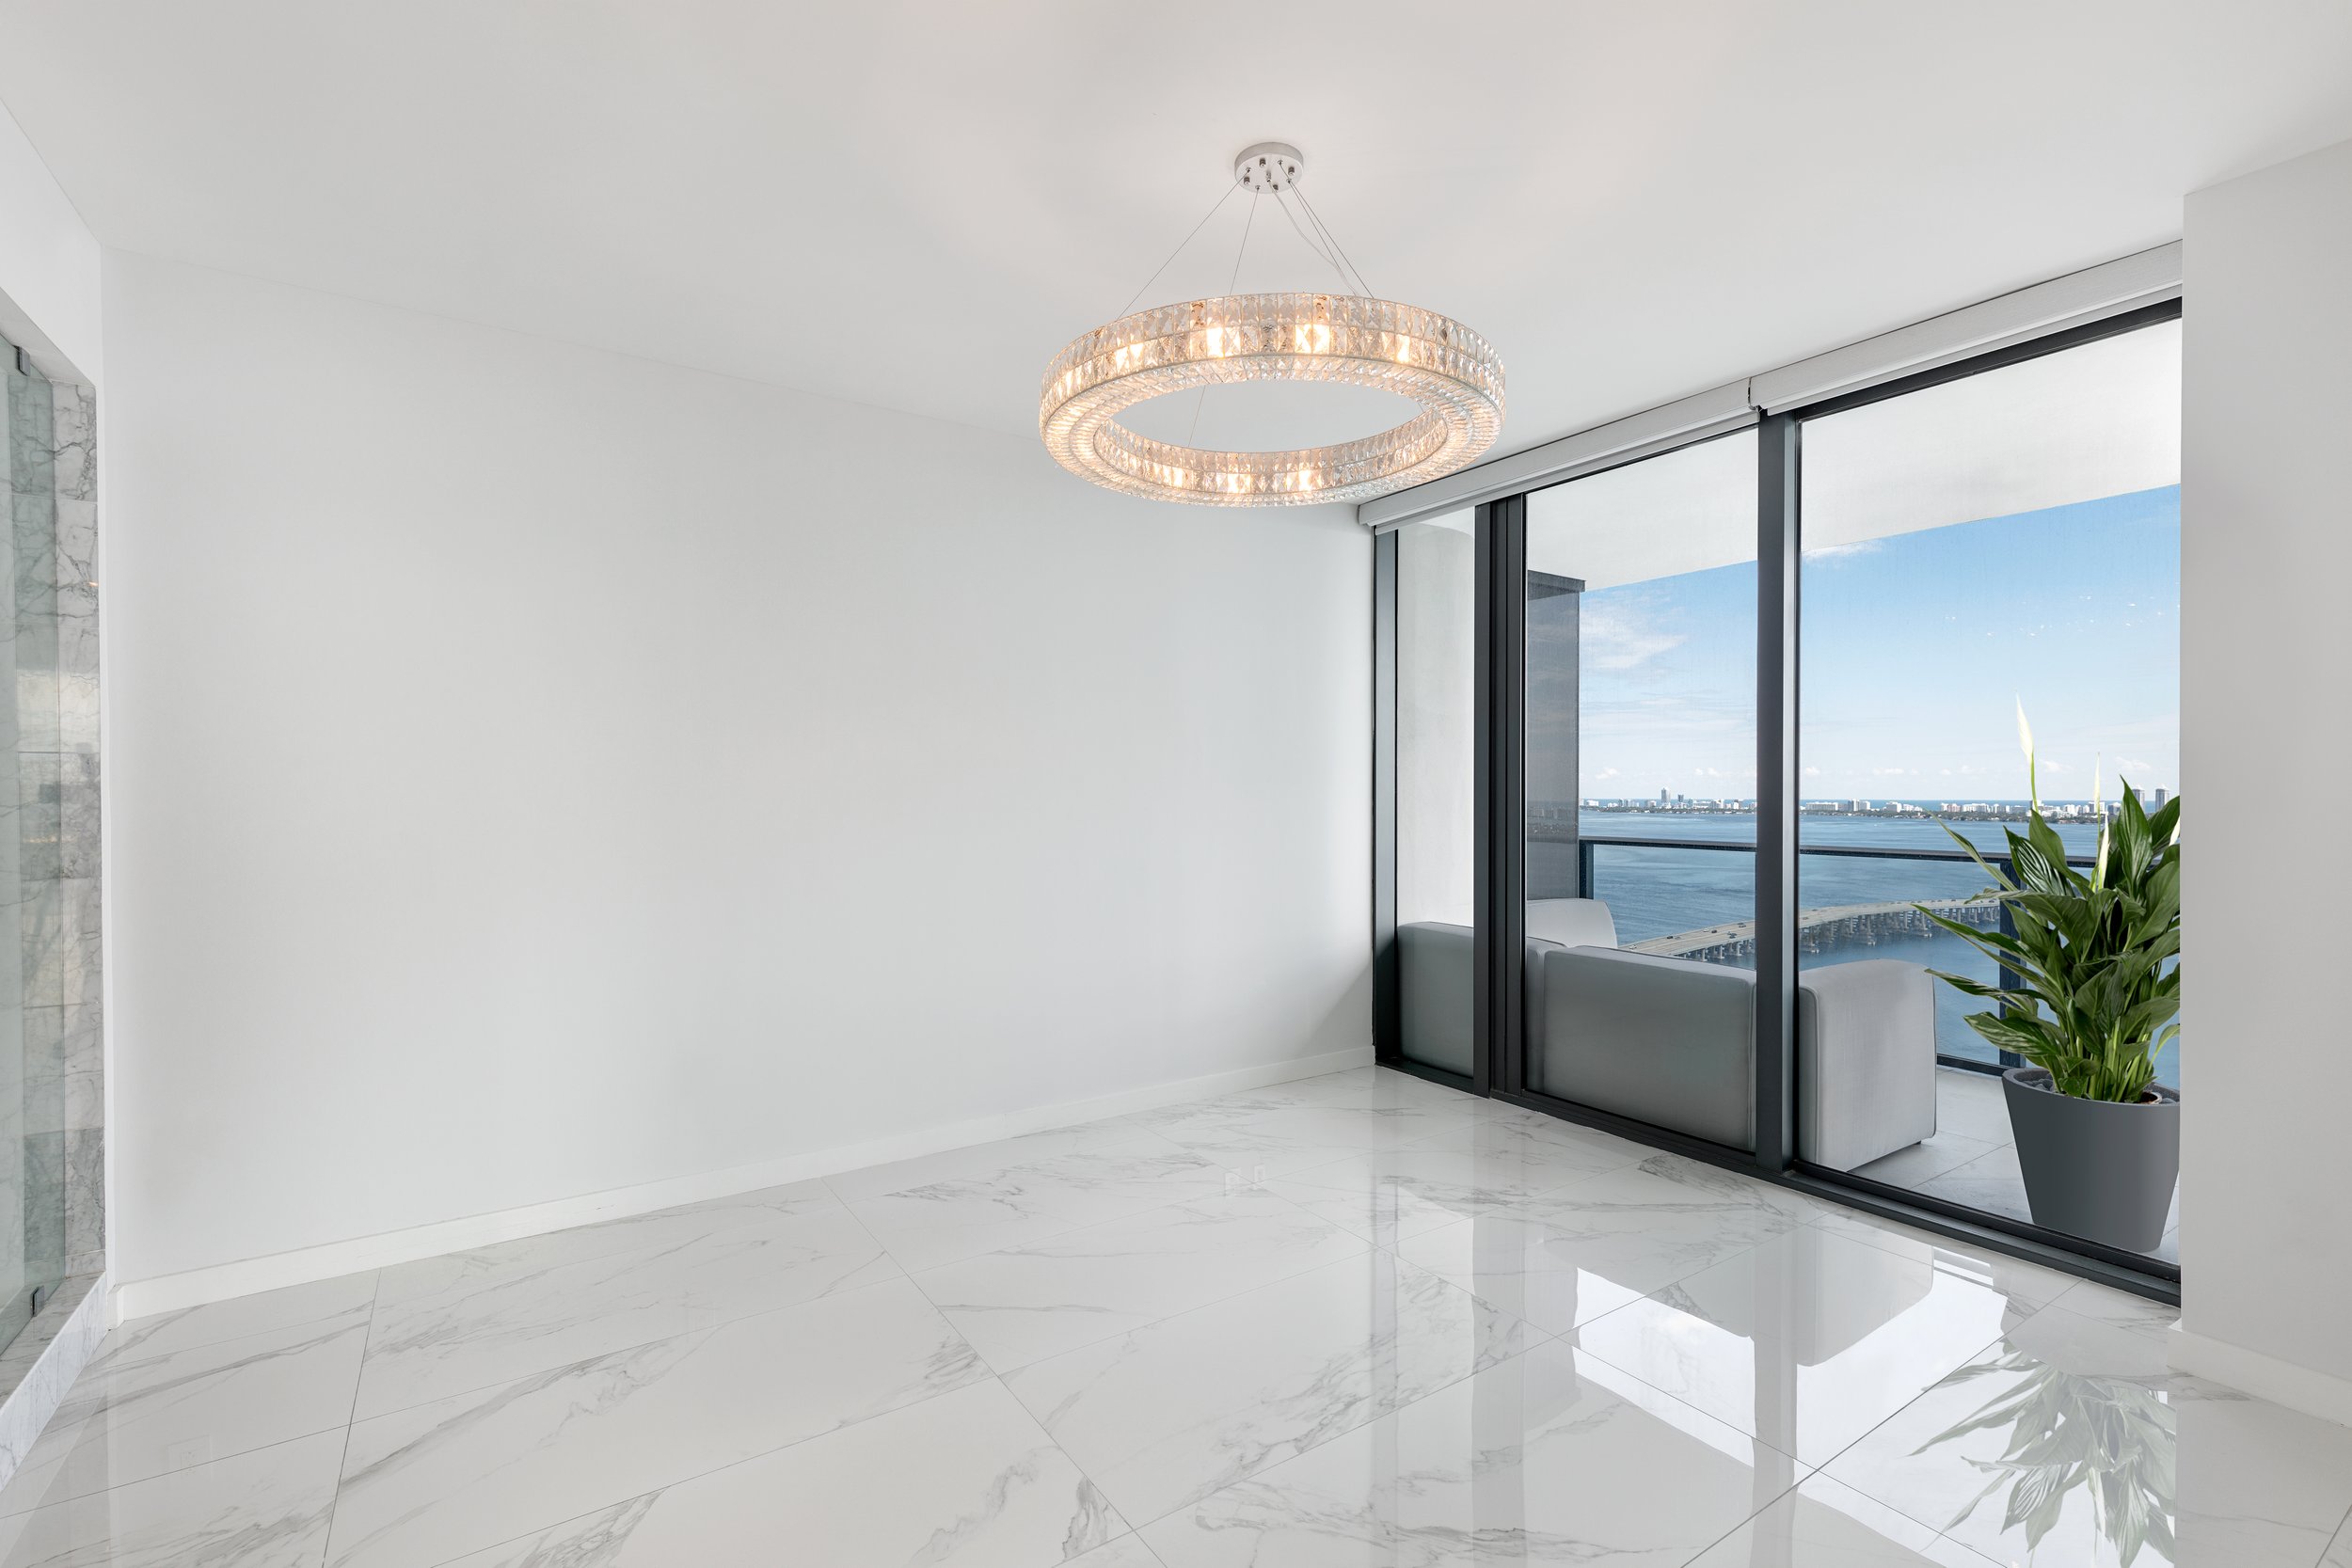 Check Out The Views From This Bayfront Sky Residence at One Paraiso Asking $1.925 Million 17.jpg